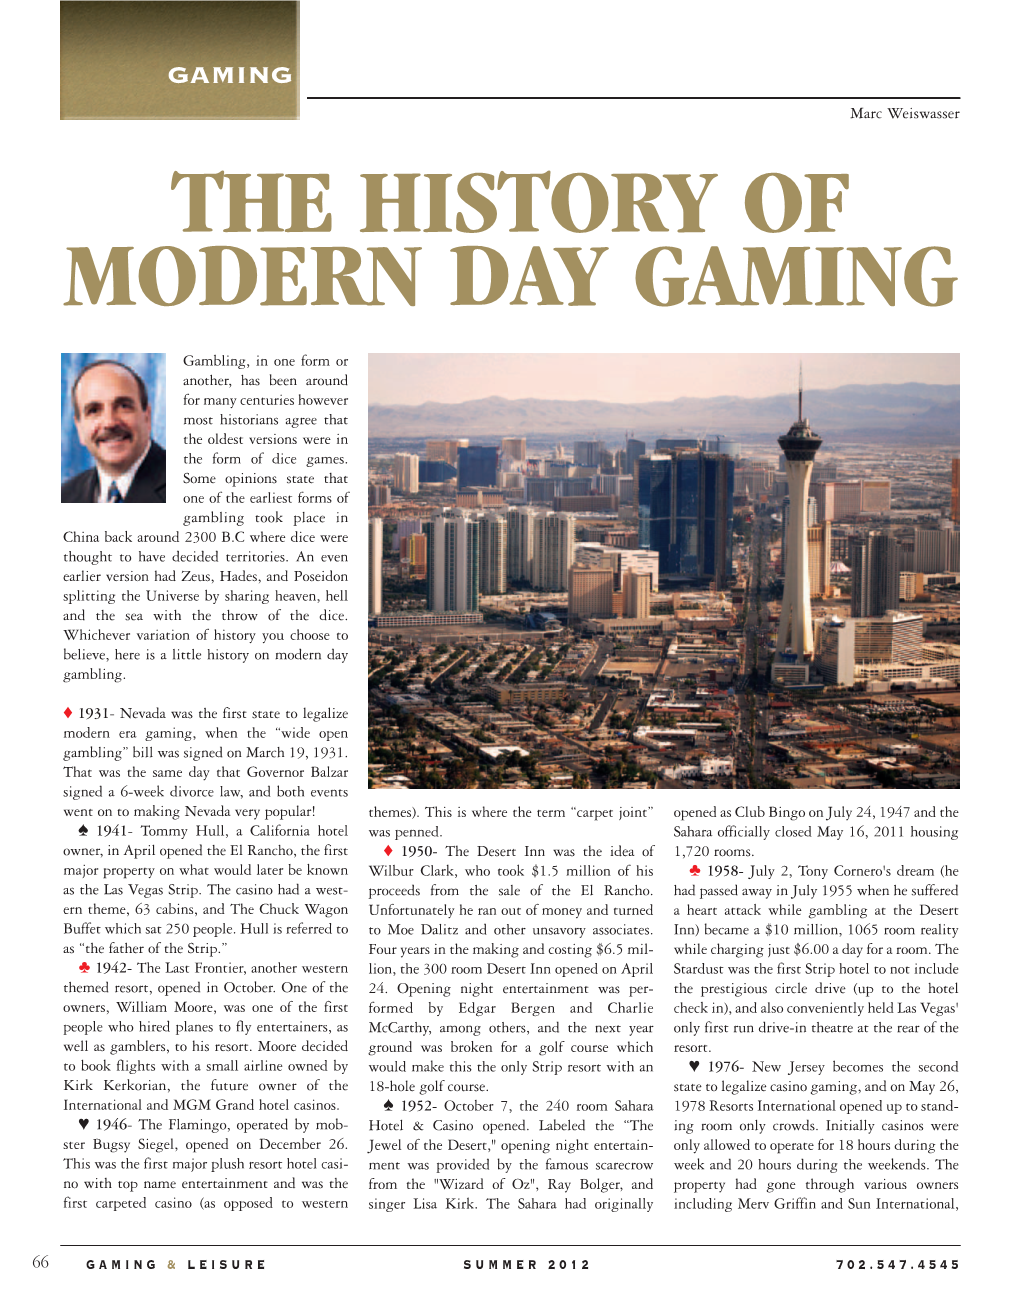 The History of Modern Day Gaming